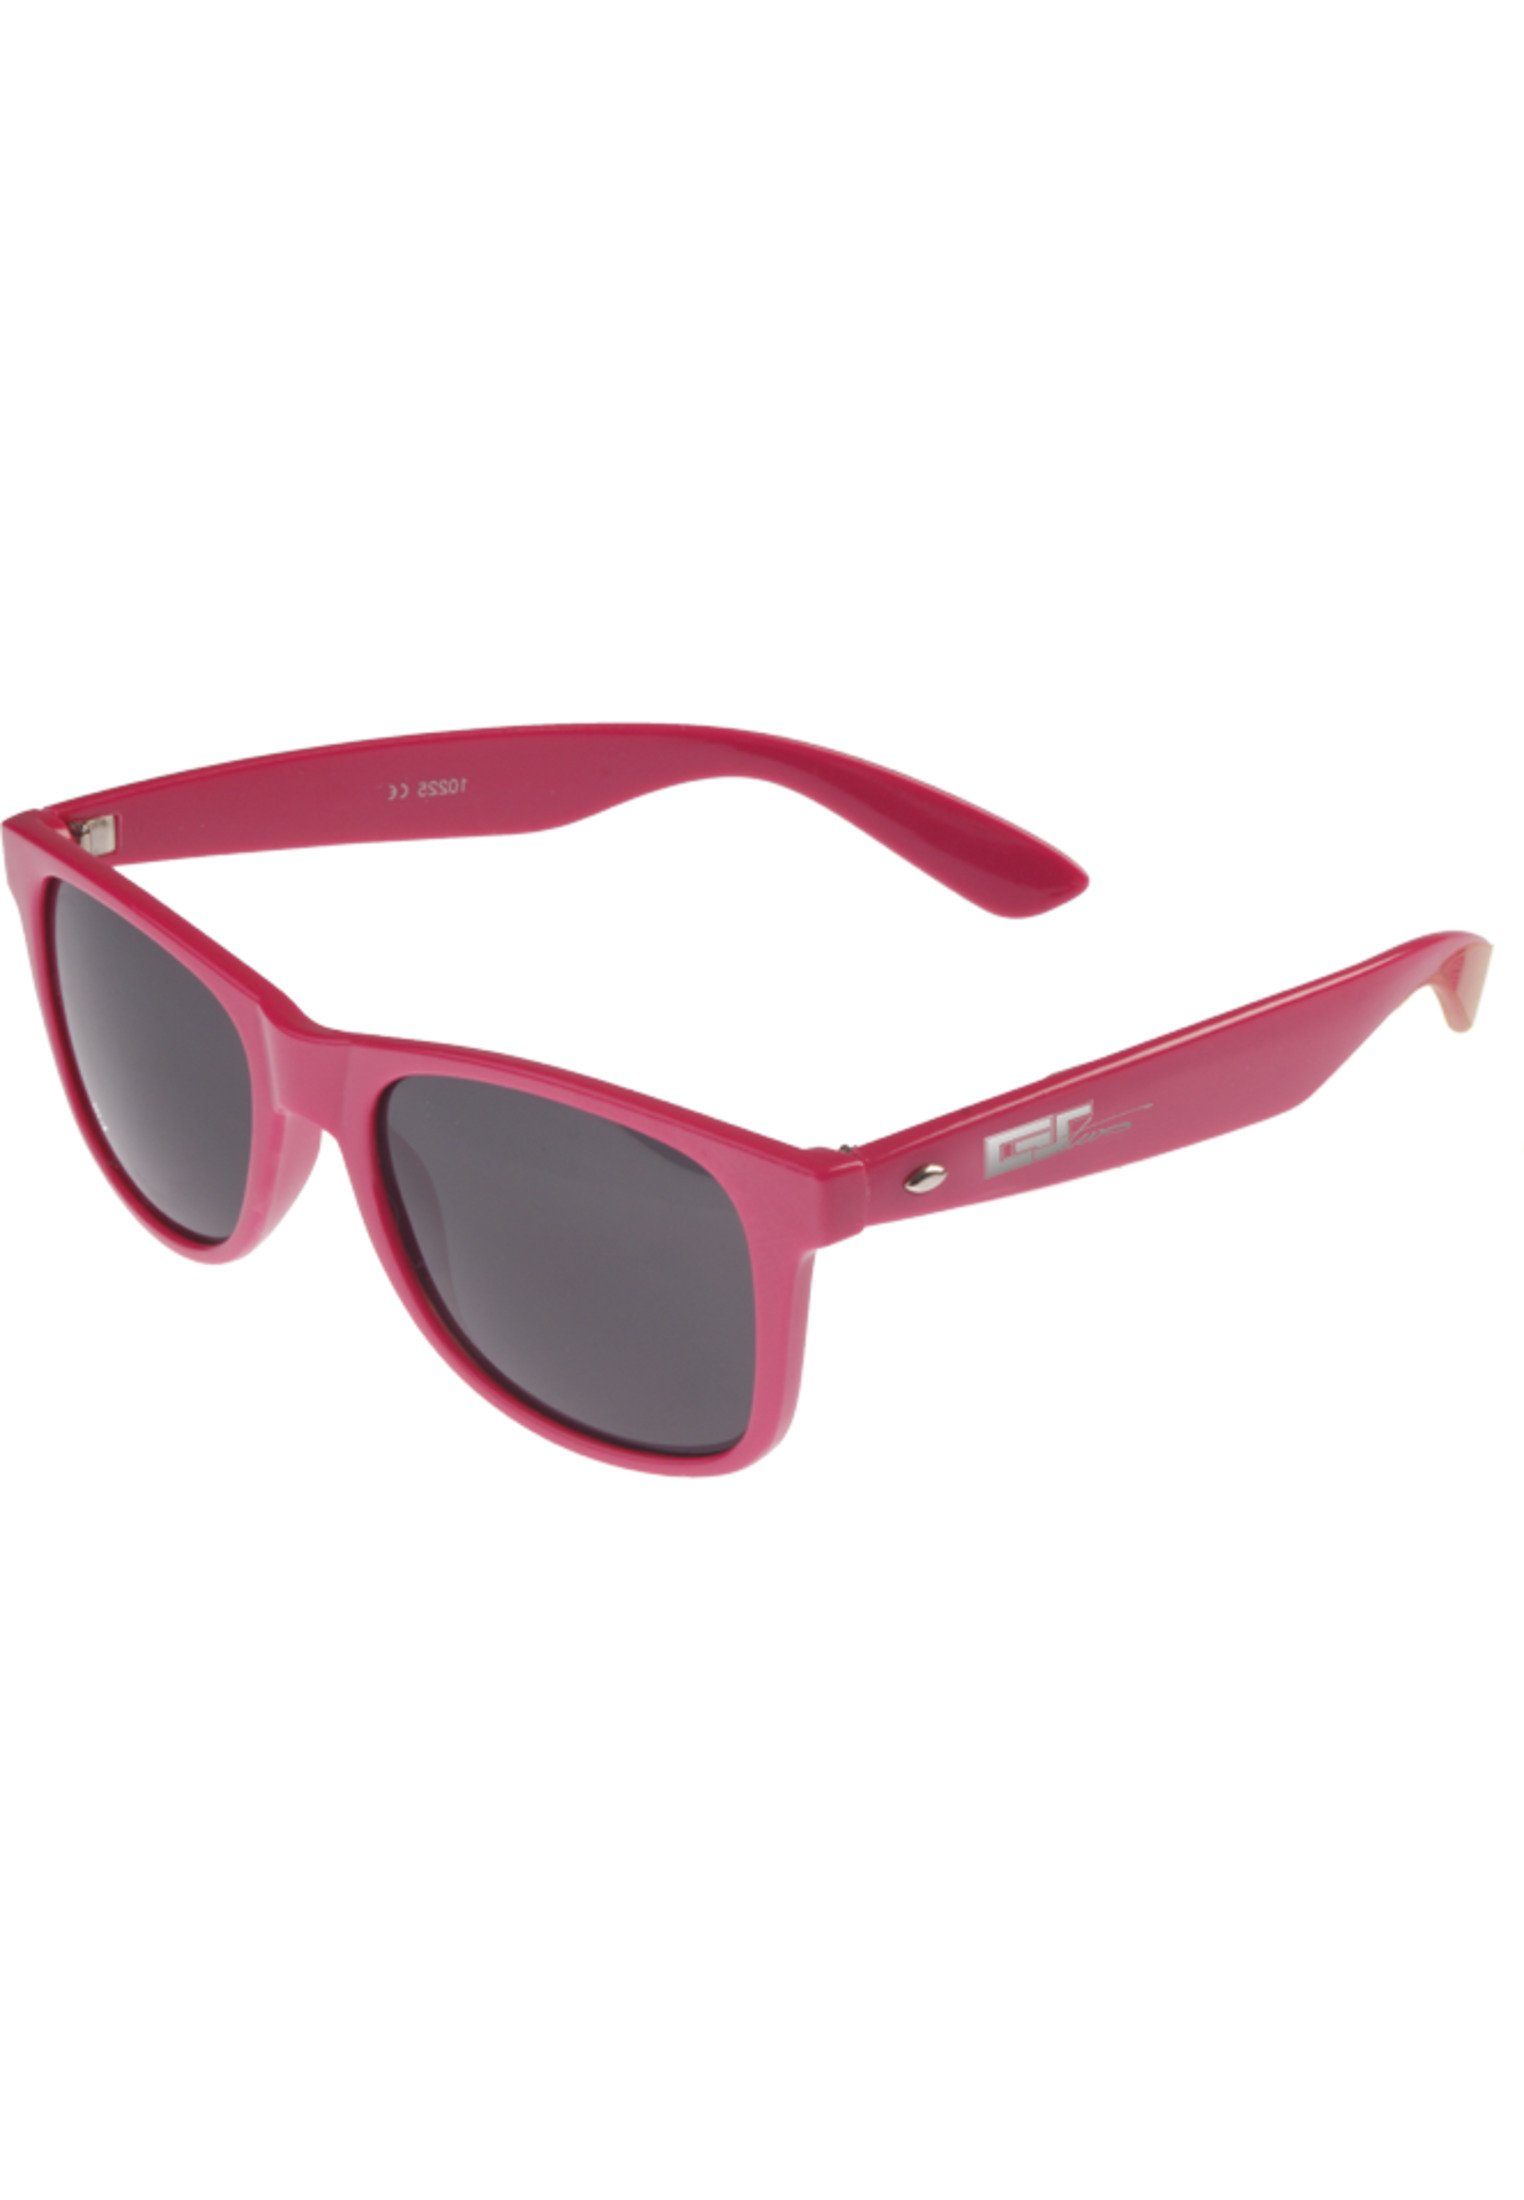 MSTRDS Sonnenbrille Accessoires Groove GStwo Shades magenta